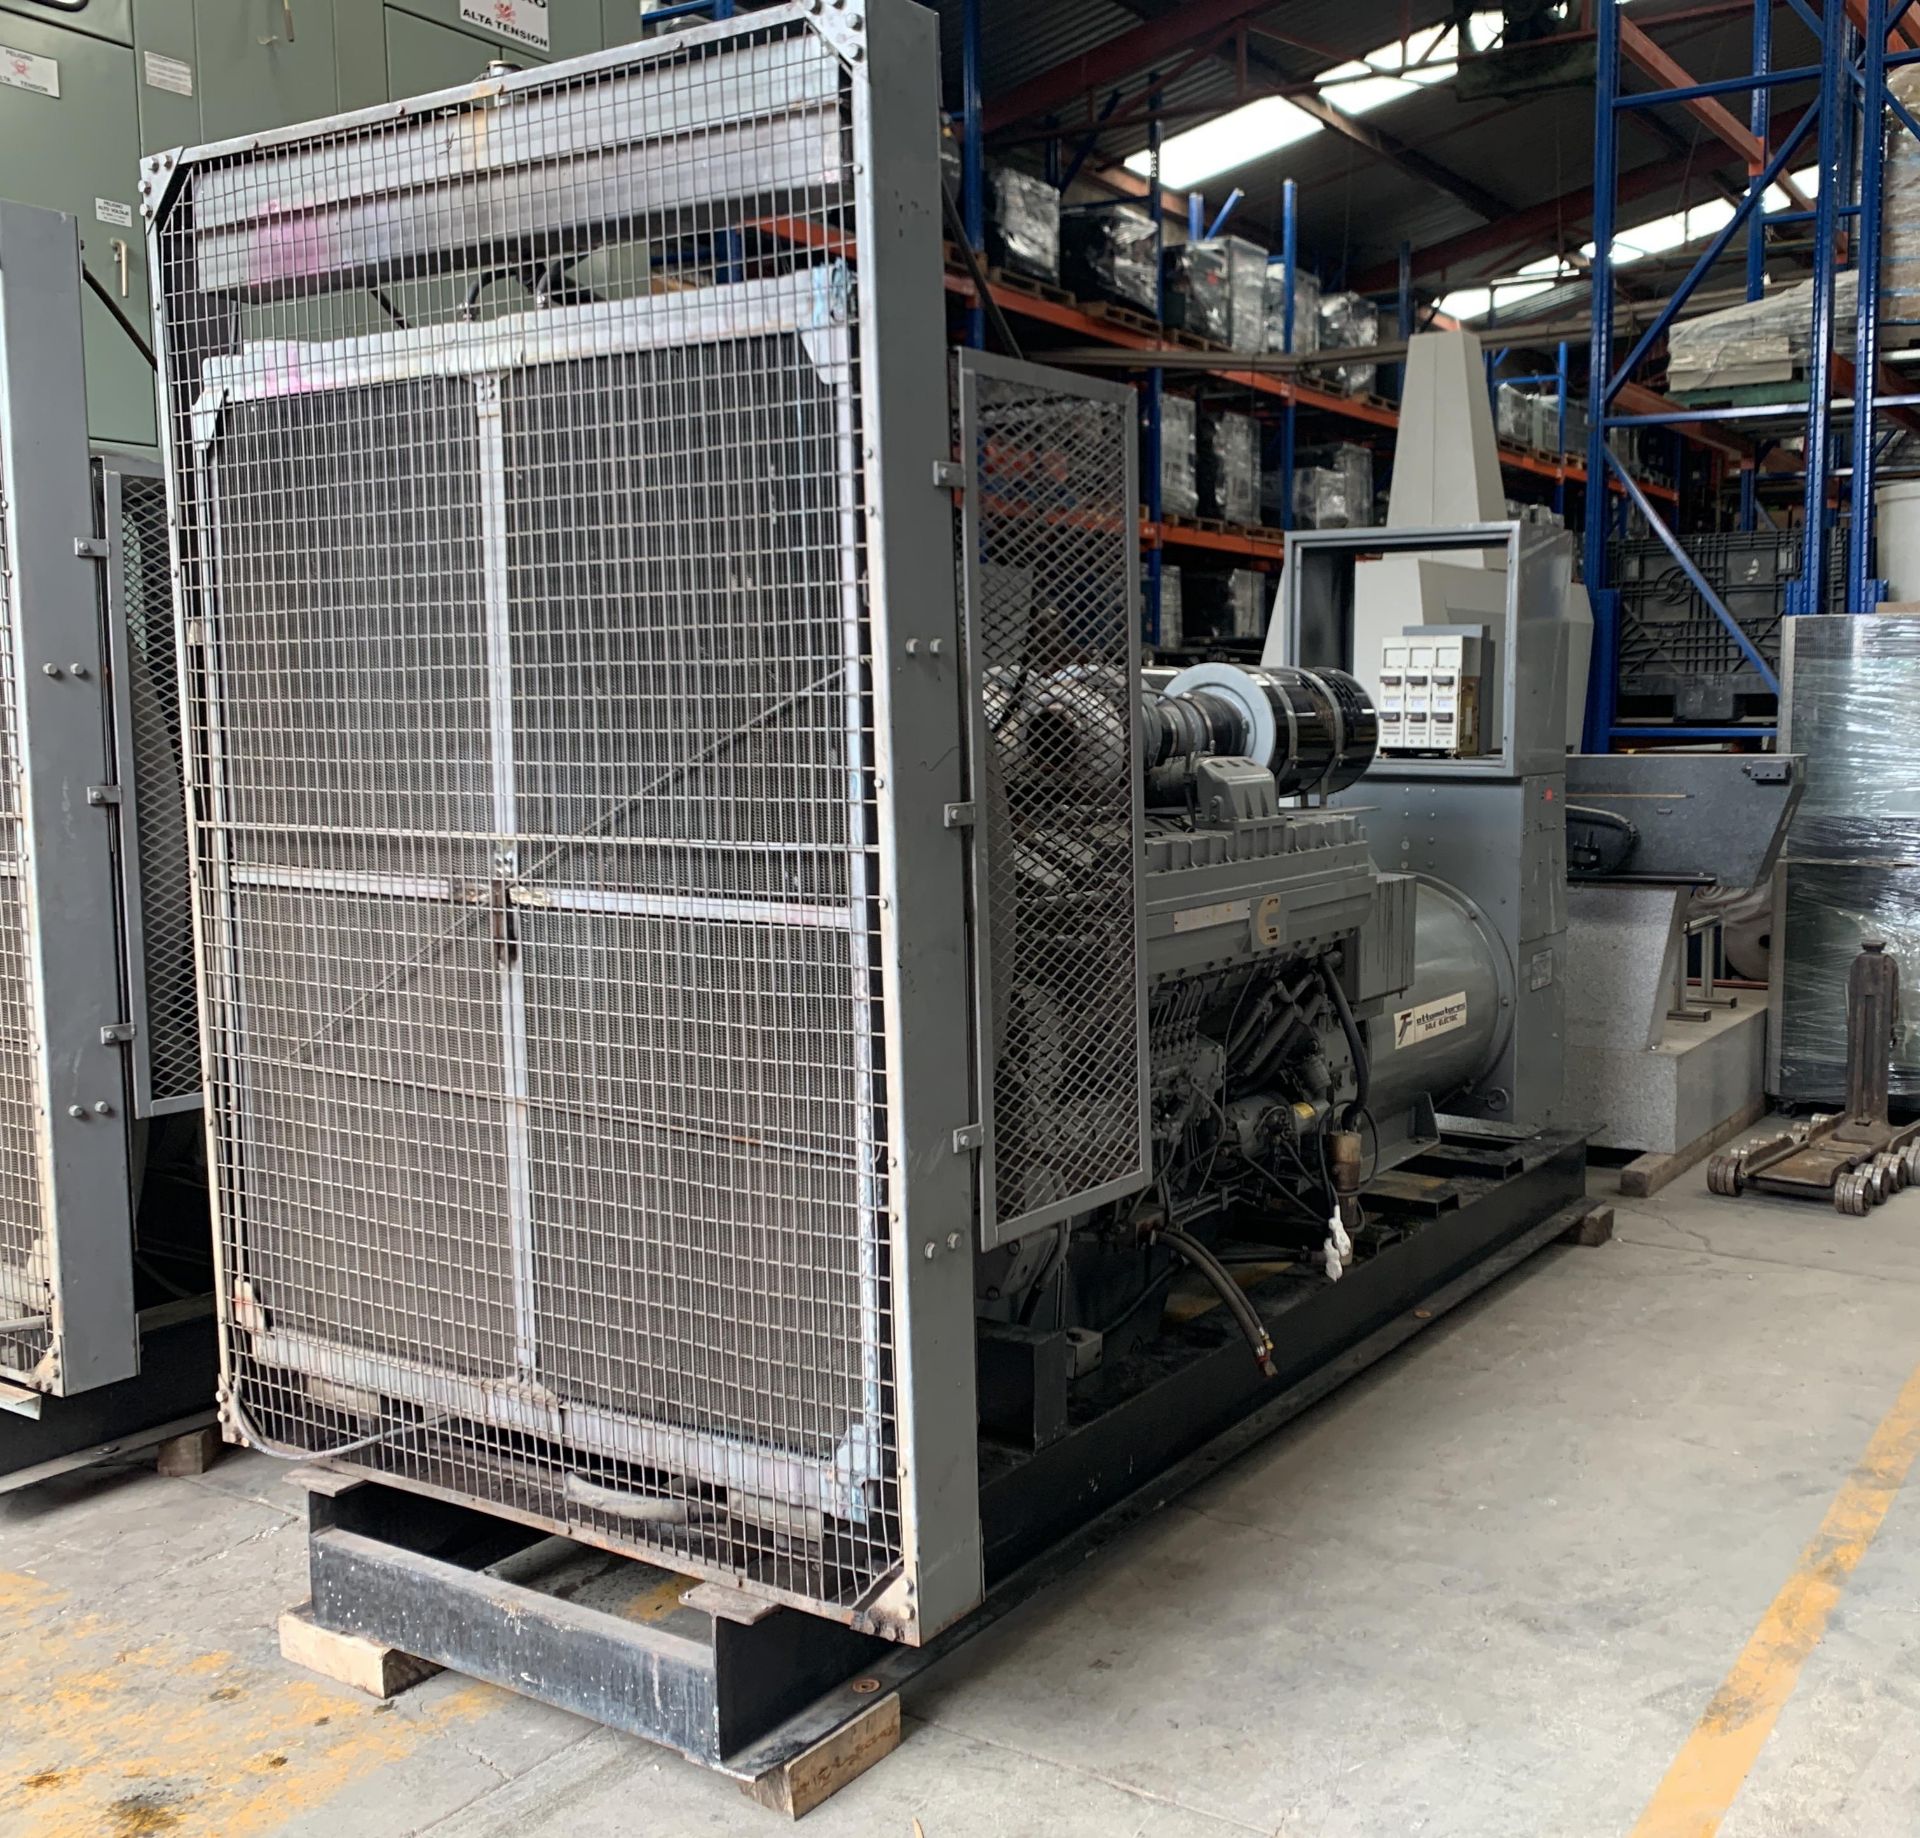 Ottomotores Emergency Power Plant of 910 kW and 1138 kVA, voltage 220 / 440 - Image 4 of 18